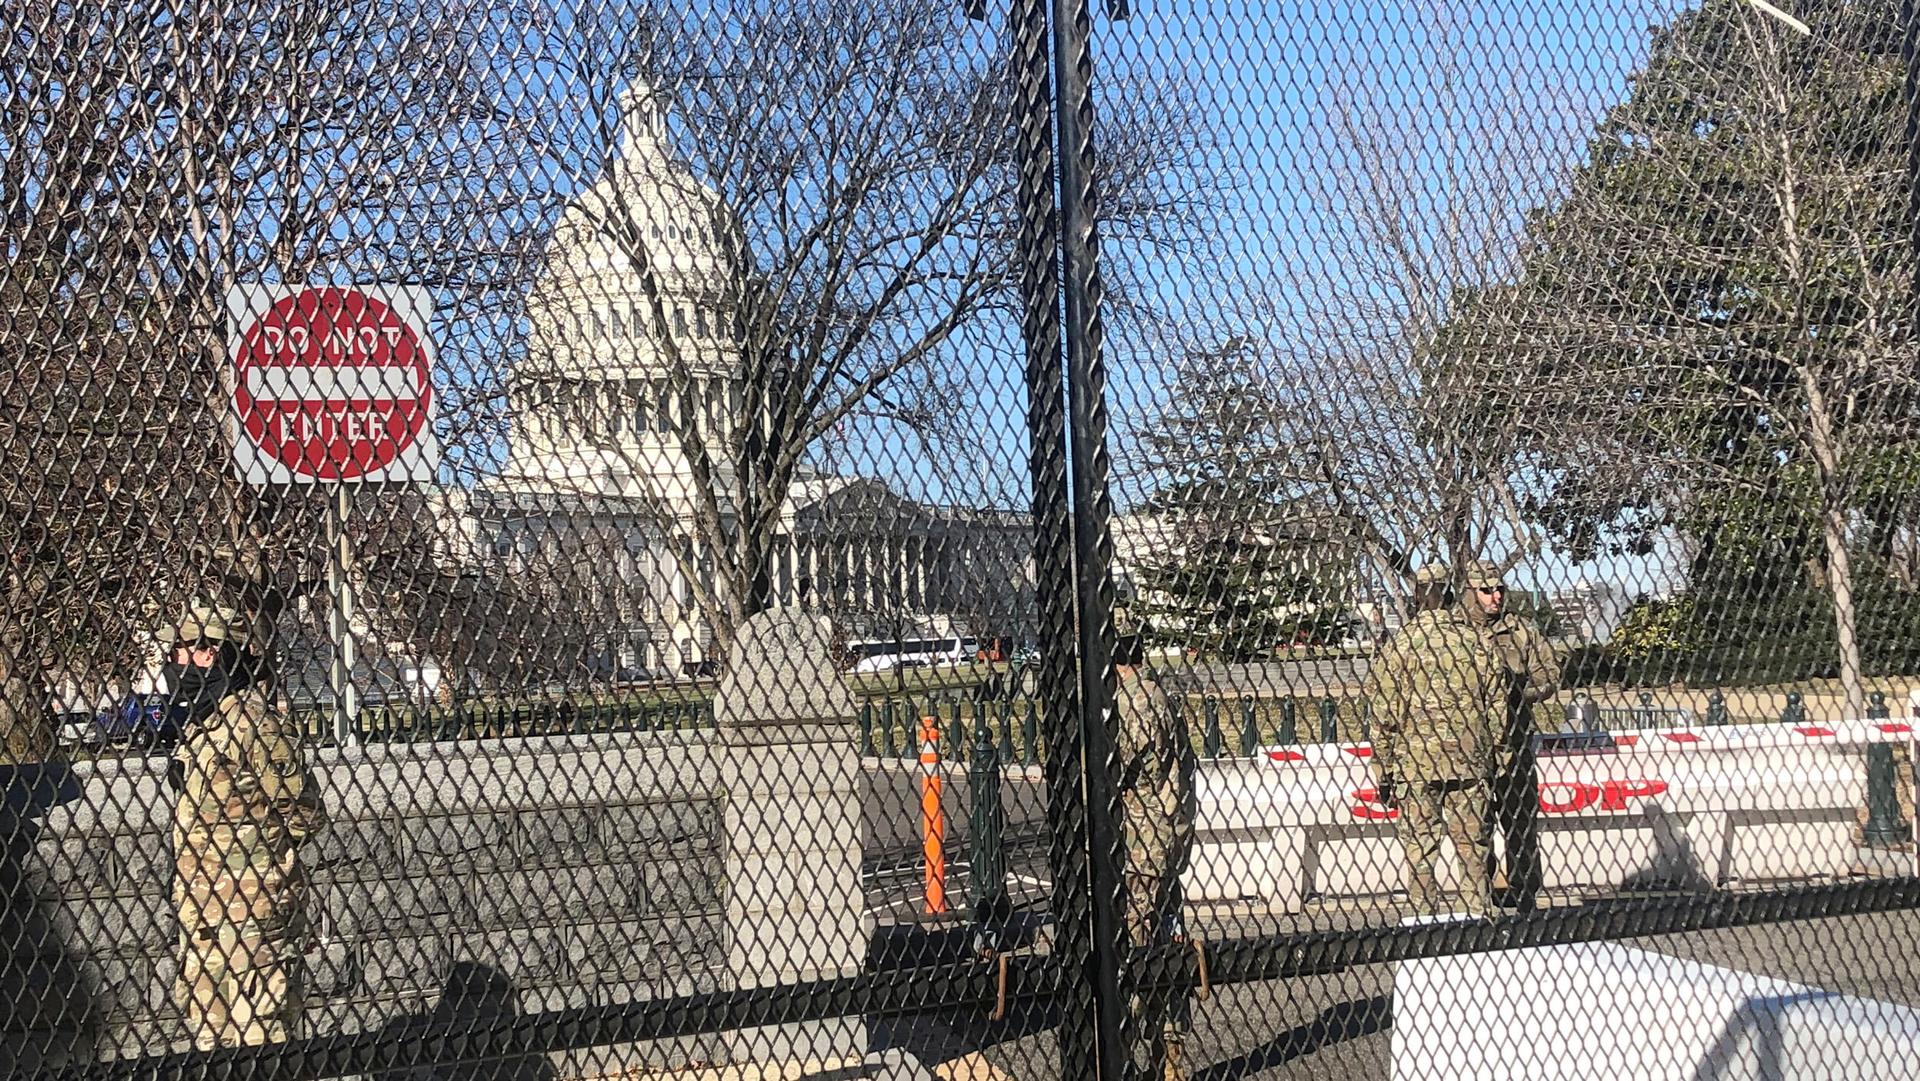 Members of the US National Guard stand inside anti-scaling fencing that surrounds the Capitol in Washington, Jan. 10, 2021.